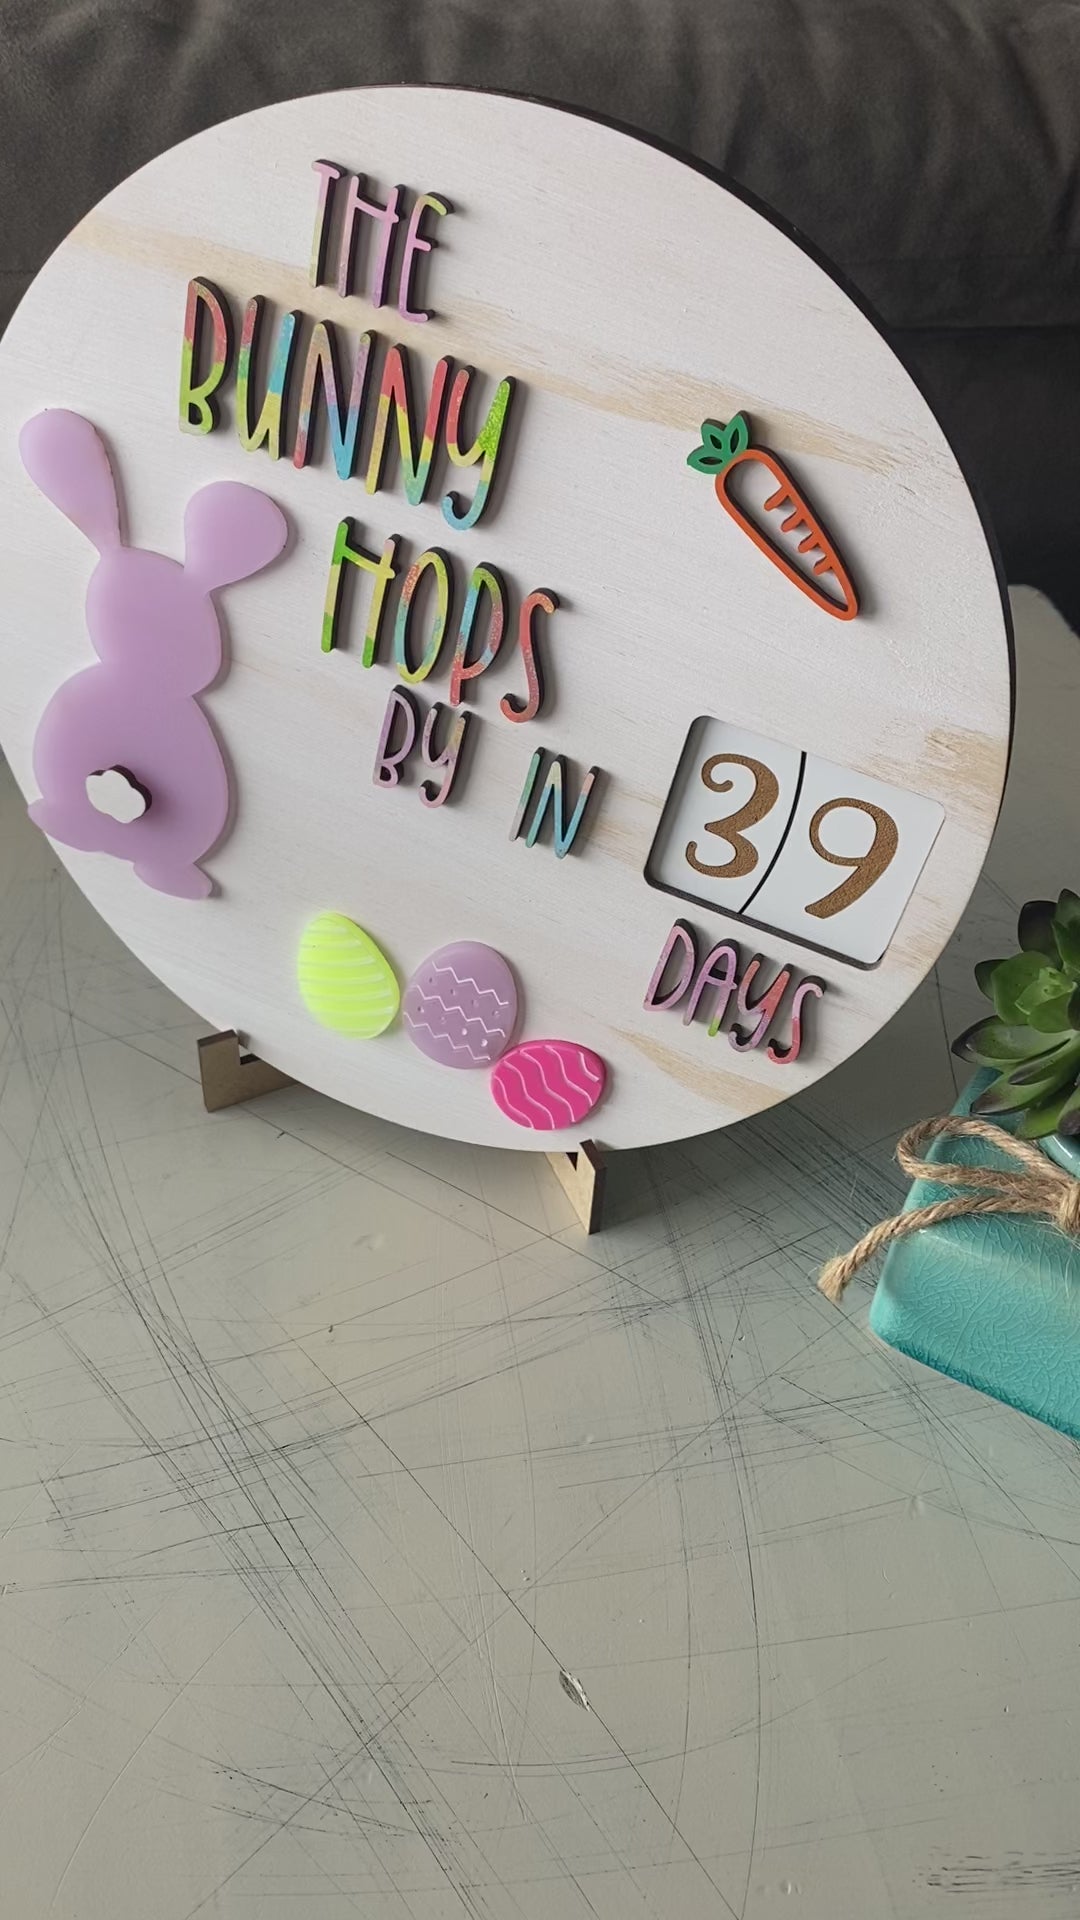 The bunny hops by in ... days - Easter countdown sign